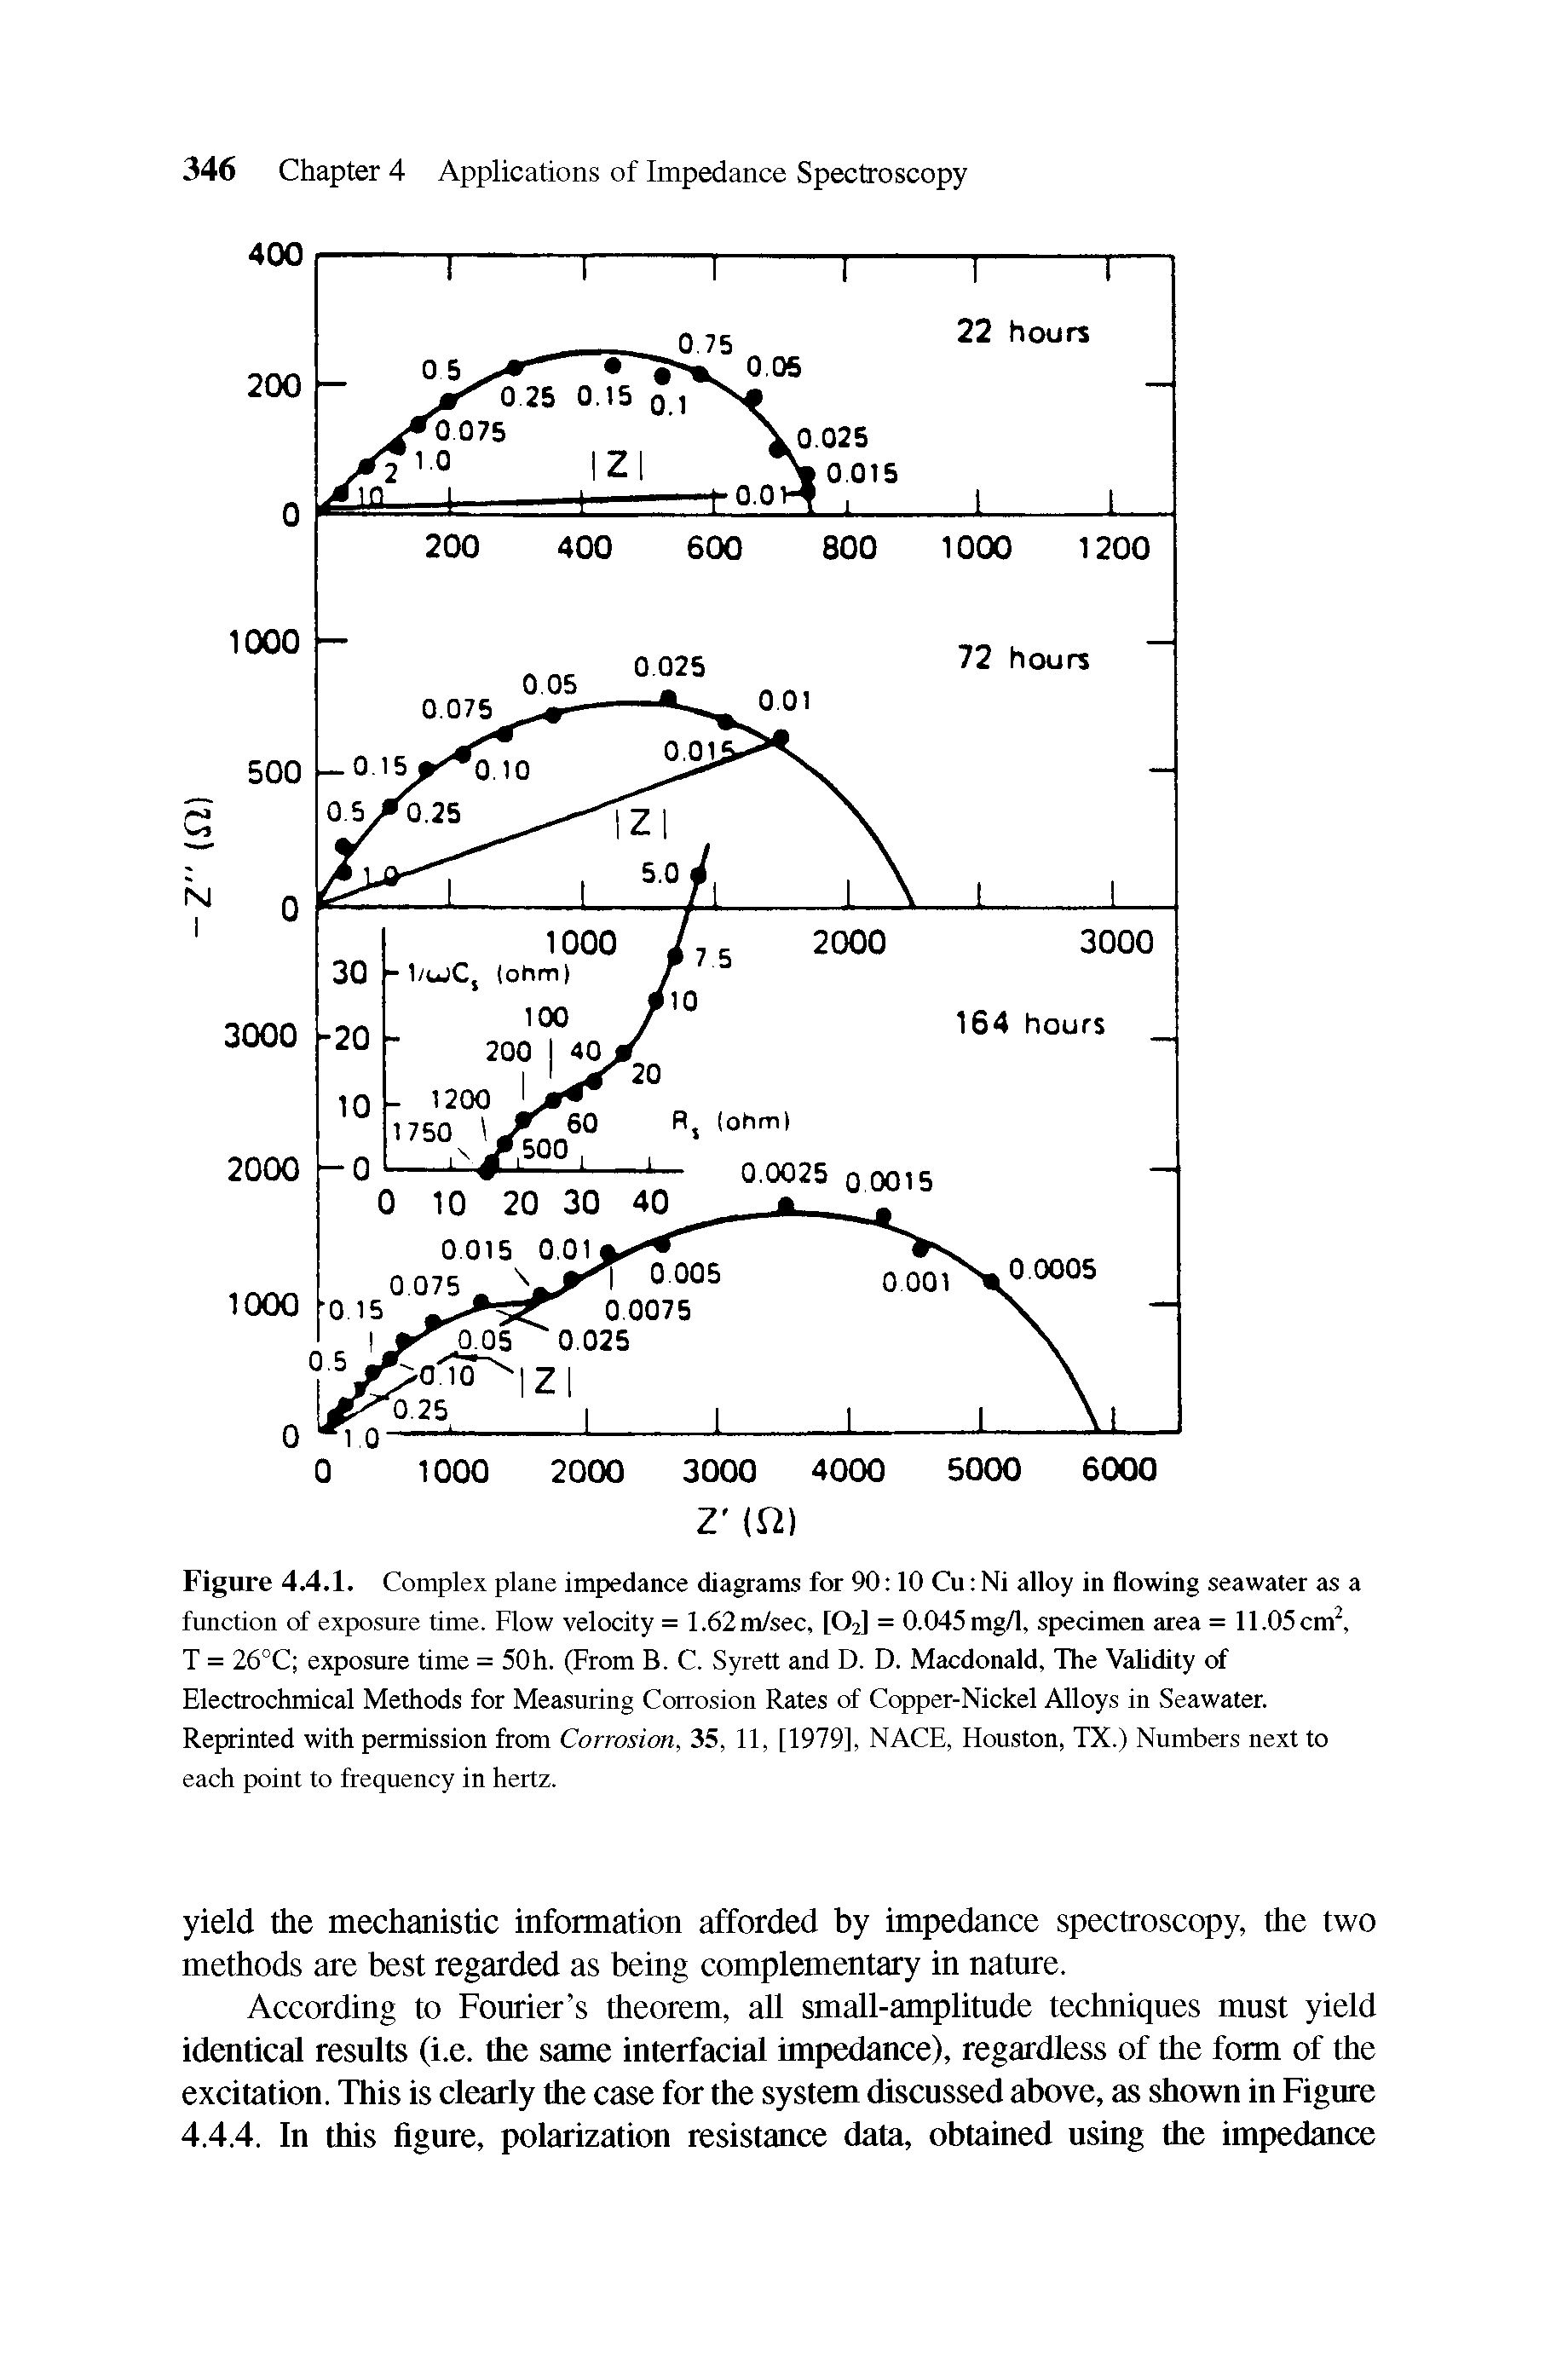 Figure 4. 1. Complex plane impedance diagrams for 90 10 Cu Ni alloy in flowing seawater as a function of exposure time. Flow velocity = 1.62m/sec, [O2] = 0.045 mg/1, specimen area = ll.OScm T = 26°C exposure time = 50h. (From B. C. Syrett and D. D. Macdonald, The Validity of Electrochmical Methods for Measuring Corrosion Rates of Copper-Nickel Alloys in Seawater. Reprinted with permission from Corrosion, 35, 11, [1979], NACE, Houston, TX.) Numbers next to each point to frequency in hertz.